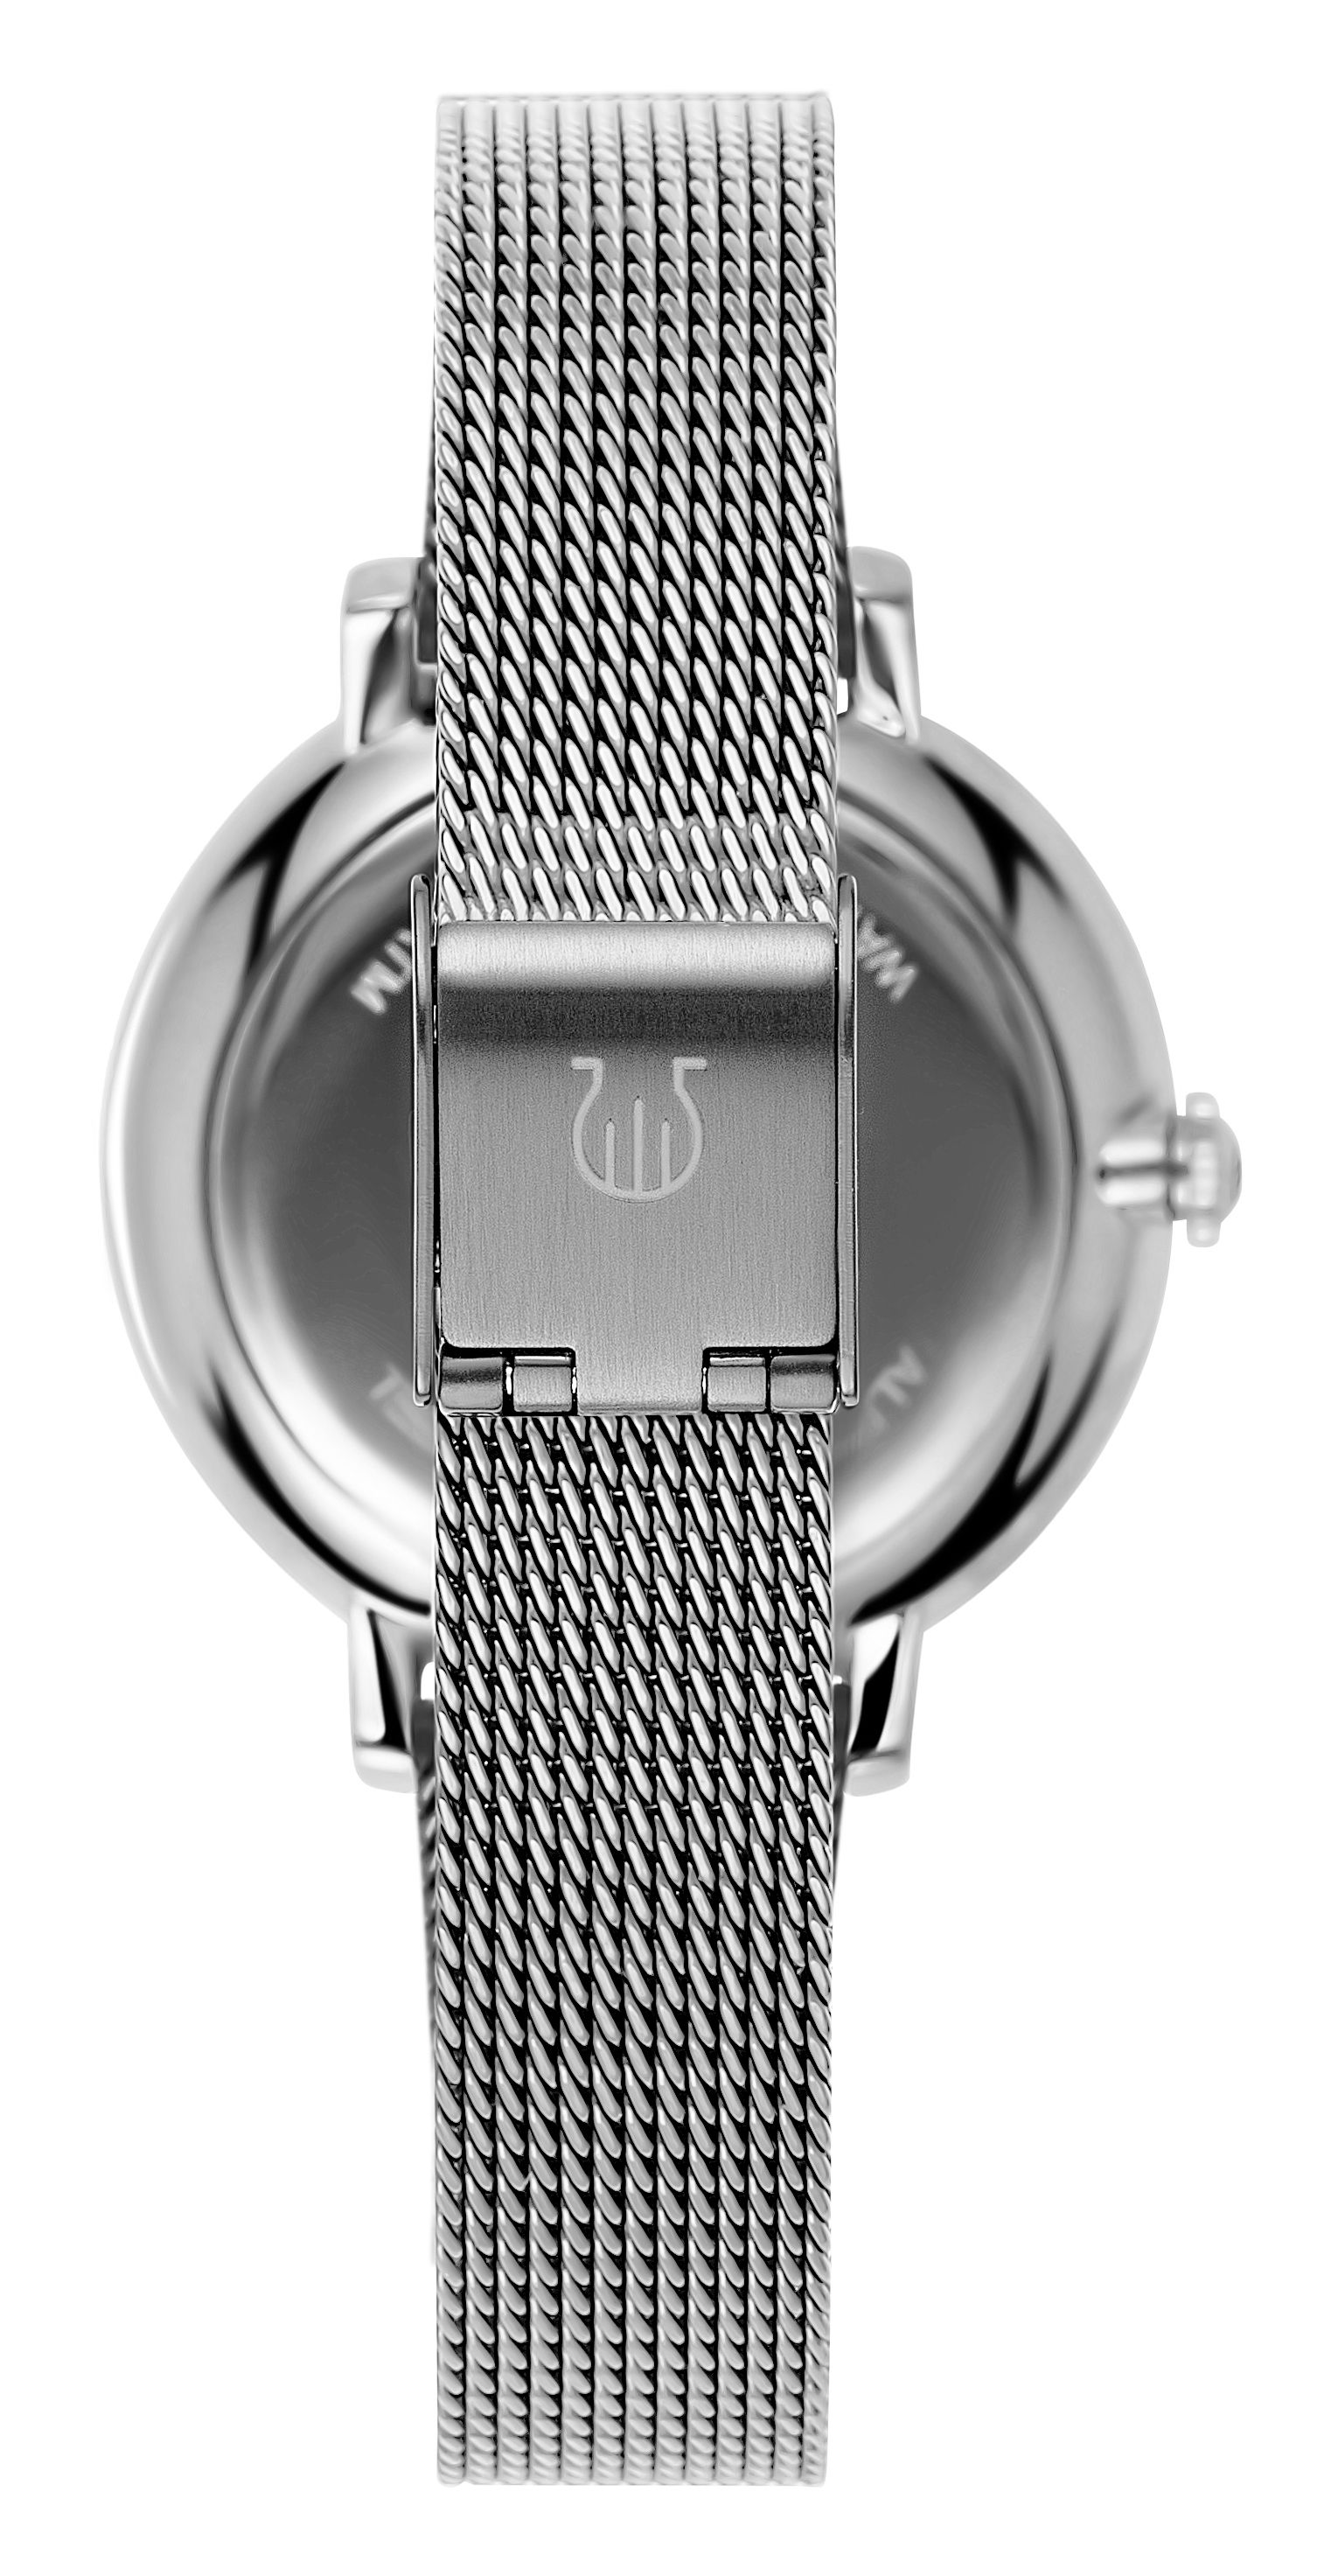 This Orphelia Derby Multi Dial Watch for Women is the perfect timepiece to wear or to gift. It's Silver 35 mm Round case combined with the comfortable Silver Stainless steel watch band will ensure you enjoy this stunning timepiece without any compromise. Operated by a high quality Quartz movement and water resistant to 3 bars, your watch will keep ticking. STRONG MATERIALS: This ORPHELIA Derby Multi dial watch with a Miyota Quartz movement includes a date and 24-hour display, its durable yet feminine, ready to shine in every event. PREMIUM QUALITY: By using high-quality materials  Glass: Mineral Glass  Case material: Stainless steel  Bracelet material: Stainless steel- Water resistant: 3 bars COMPACT SIZE: Case diameter: 35 mm  Height: 8 mm  Strap- Length: 21 cm  Width: 12 mm. Due to this practical handy size  the watch is absolutely for everyday use-Weight: 45 g